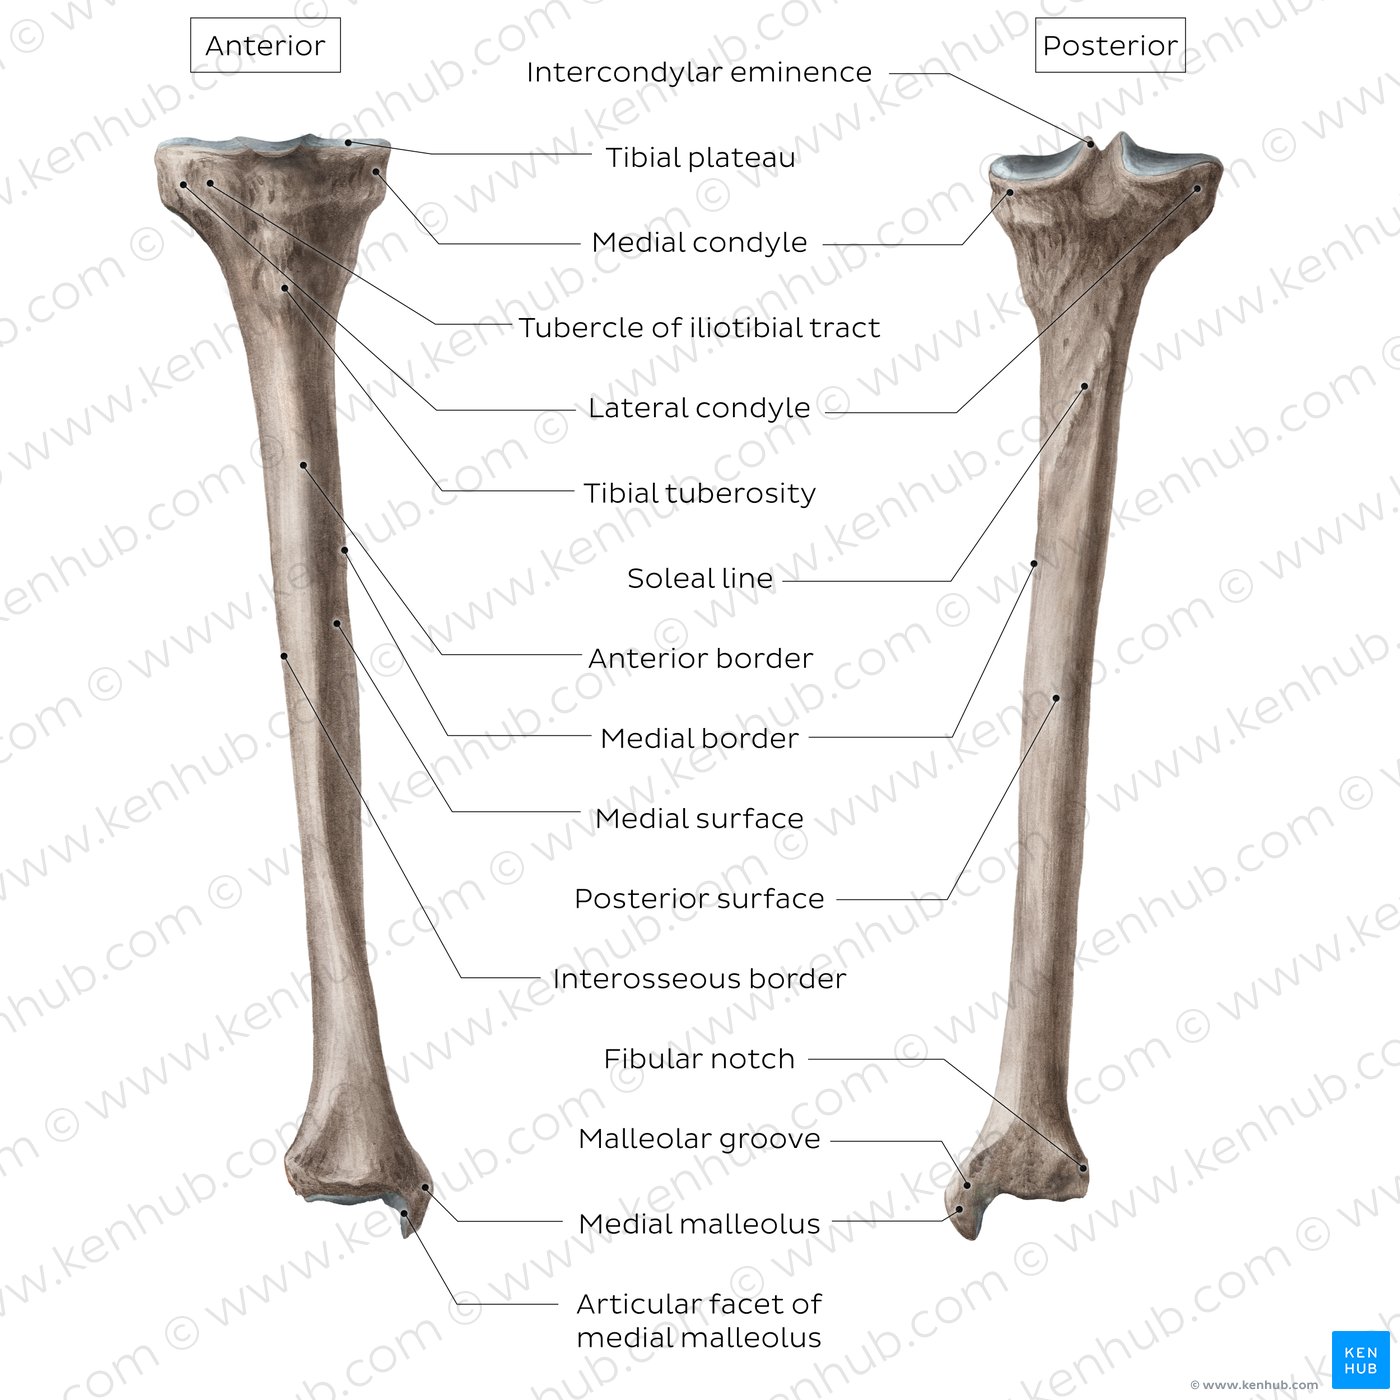 Surface Anatomy of the Lower Extremity - Prohealthsys